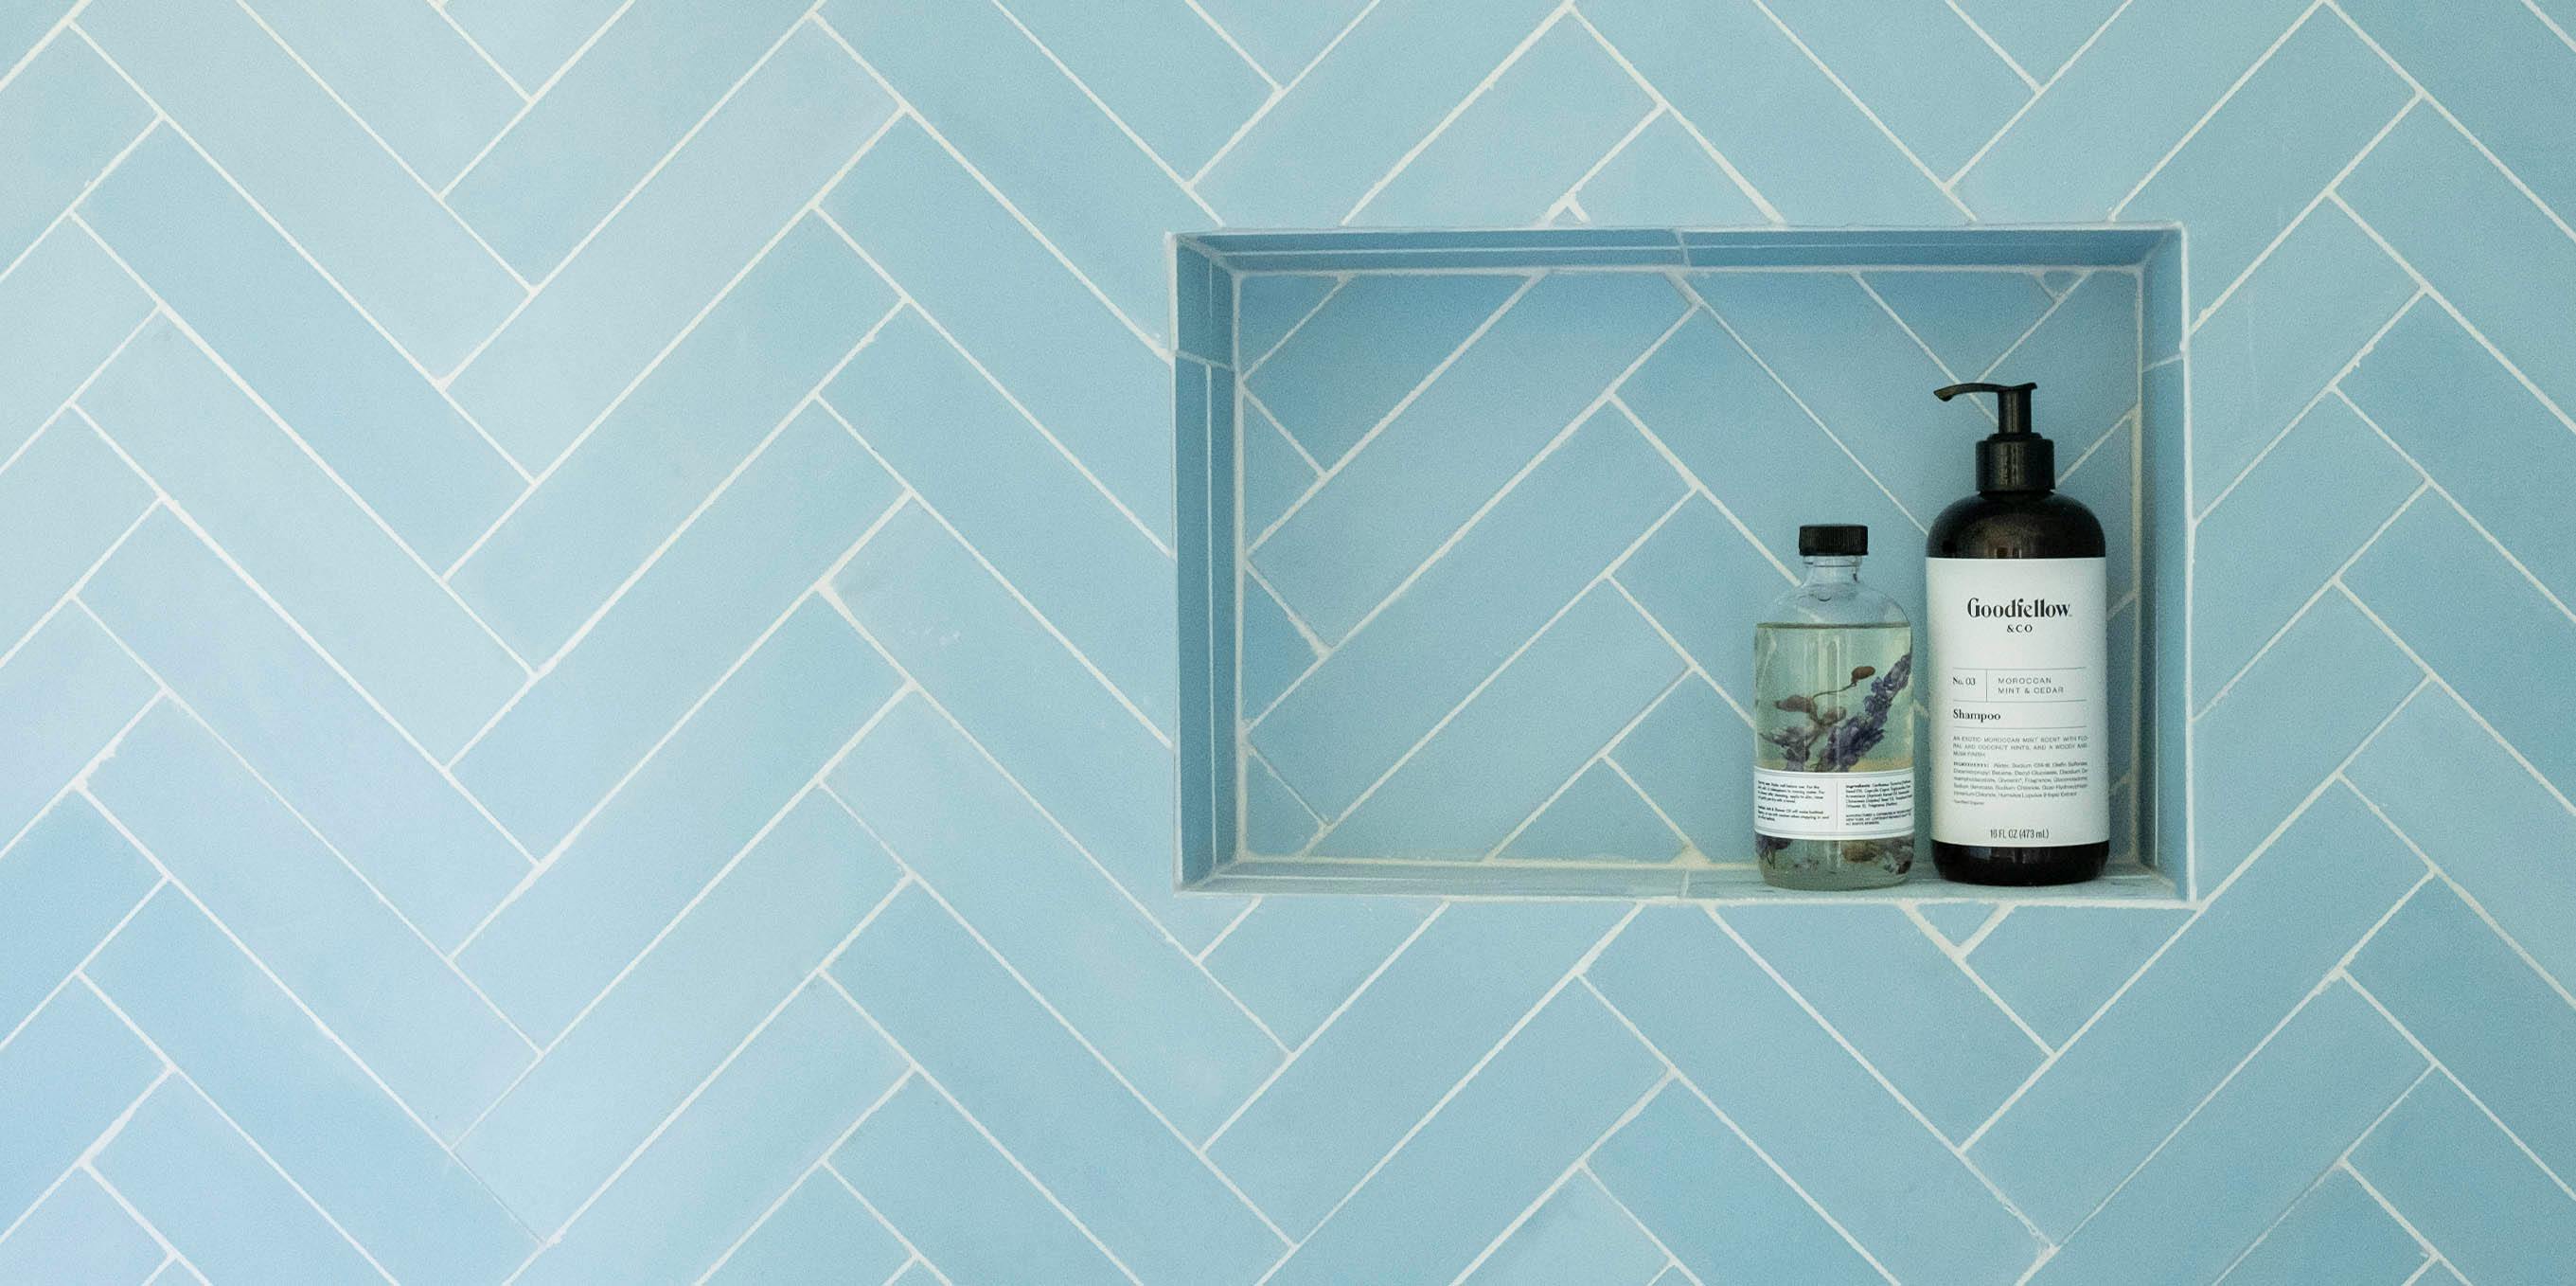 Cement Tile: Rectangle Solid collection featured image.